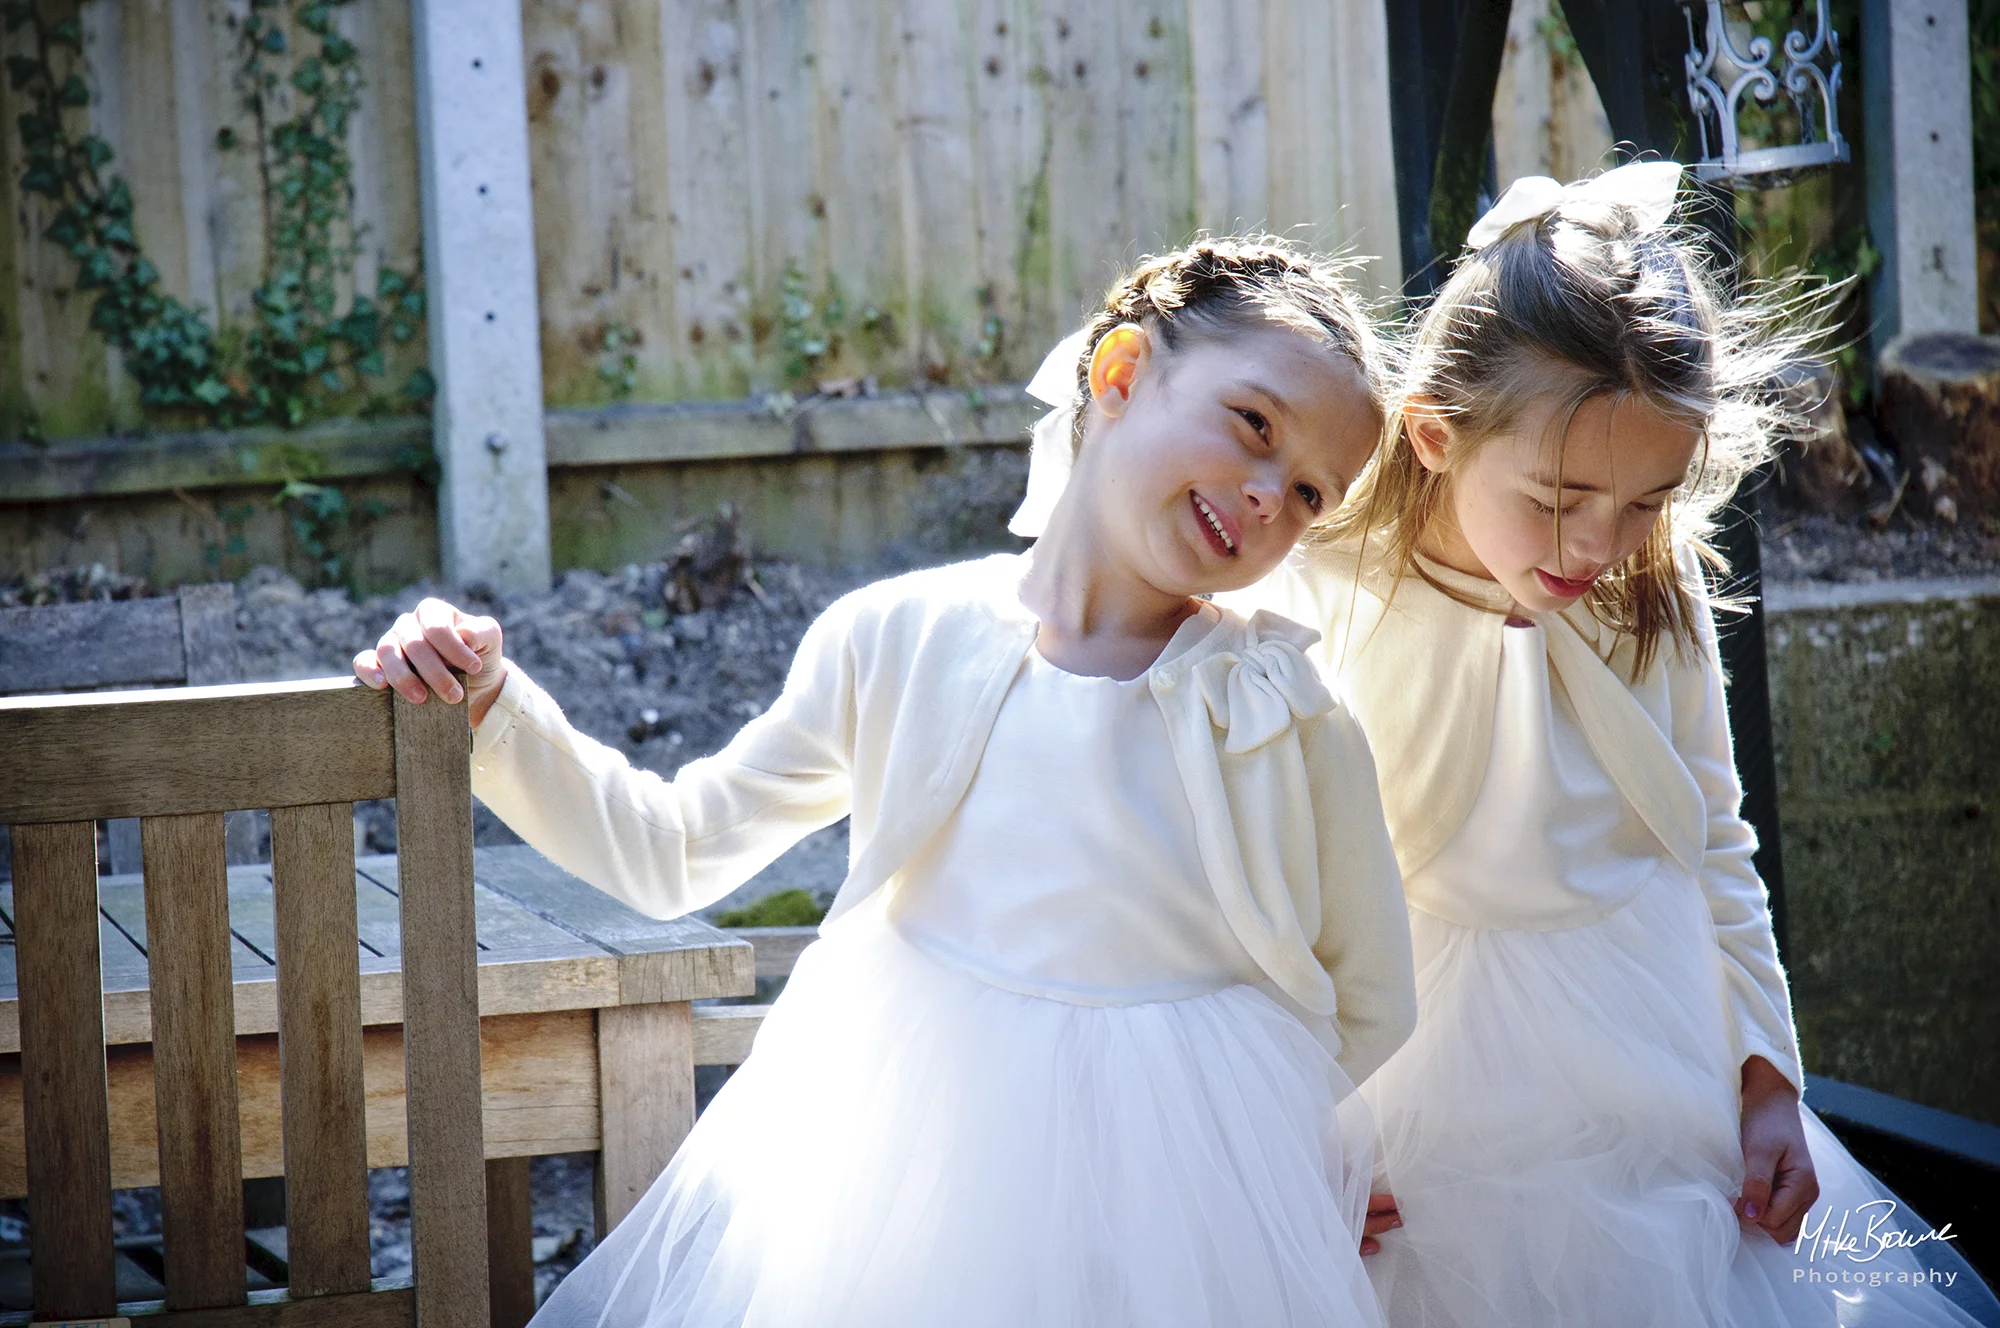 Two small girls dressed as flower girls laughing in sunshine